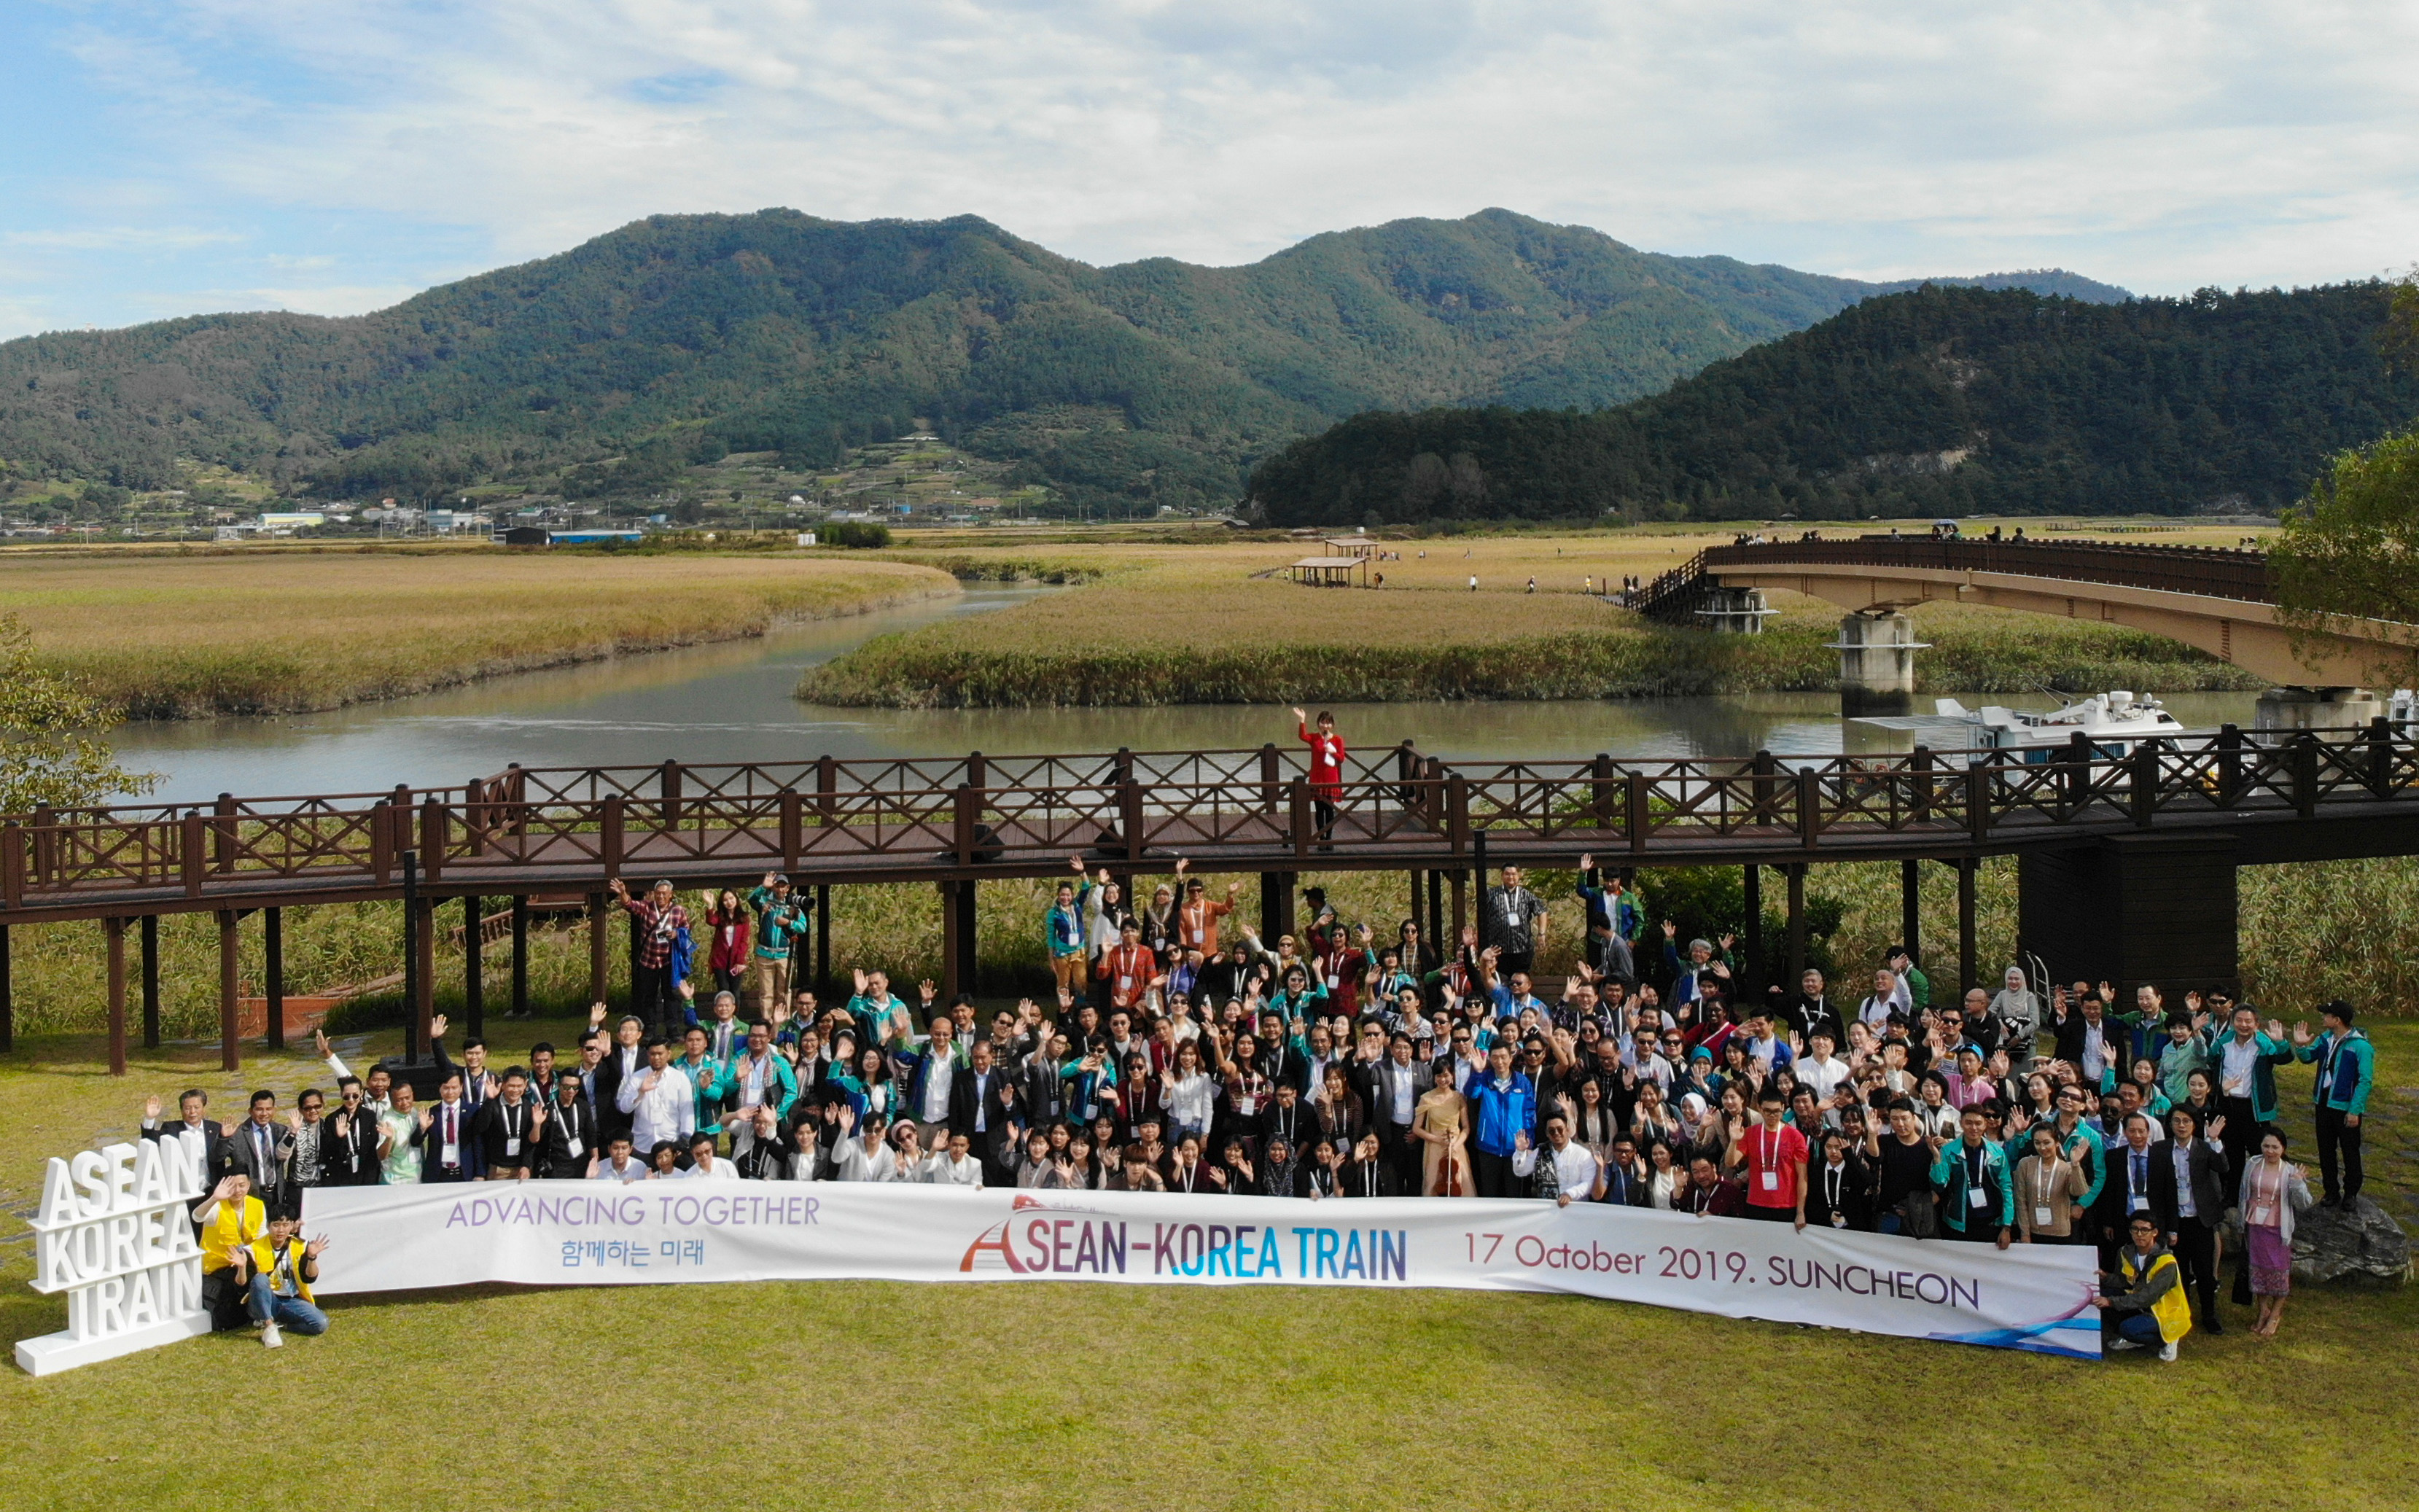 A combined 200 participants from the ASEAN region on Oct. 17 takea commemorative photo at the SuncheonmanBay Wetland Reserve as part of the ASEAN-Korea Train. (ASEAN-Korea Centre)